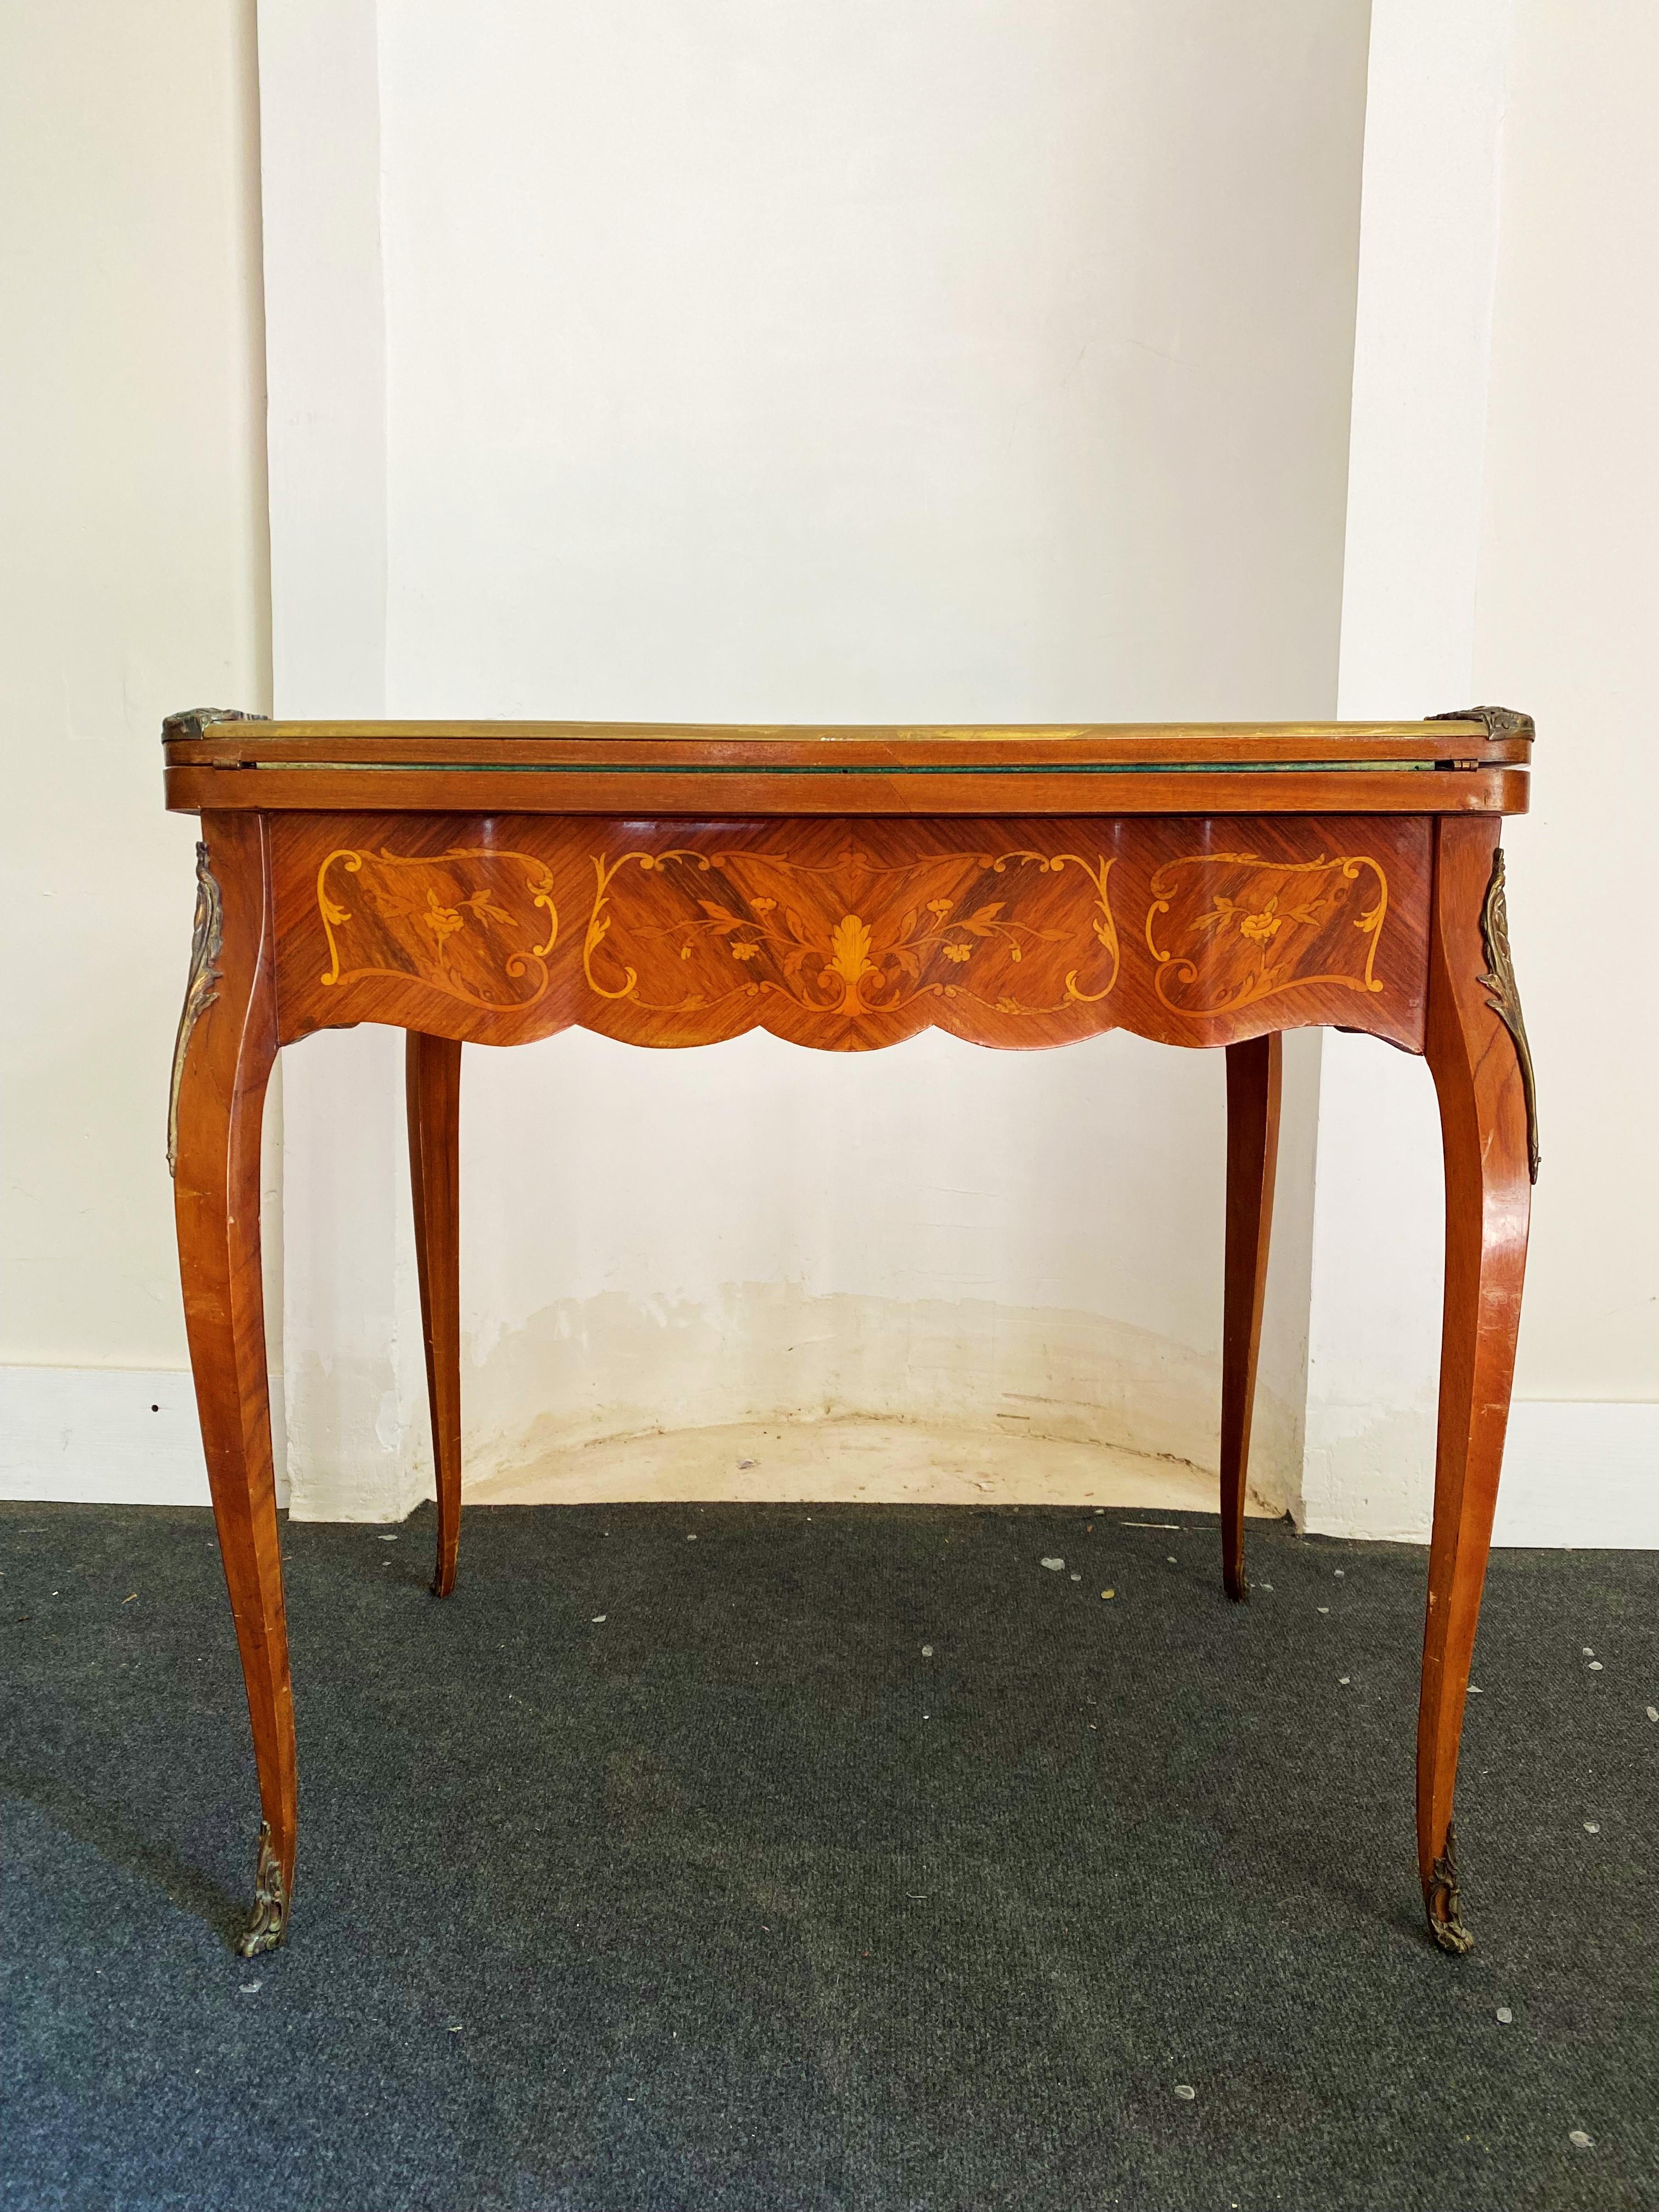 Very nice game table on high legs style Louis XV from the Napoleon 3 period of the 19th century. The wood is finely inlaid with floral and vegetal motifs. The legs are curved, the tips of the legs are in metal, while metal decorations are present on